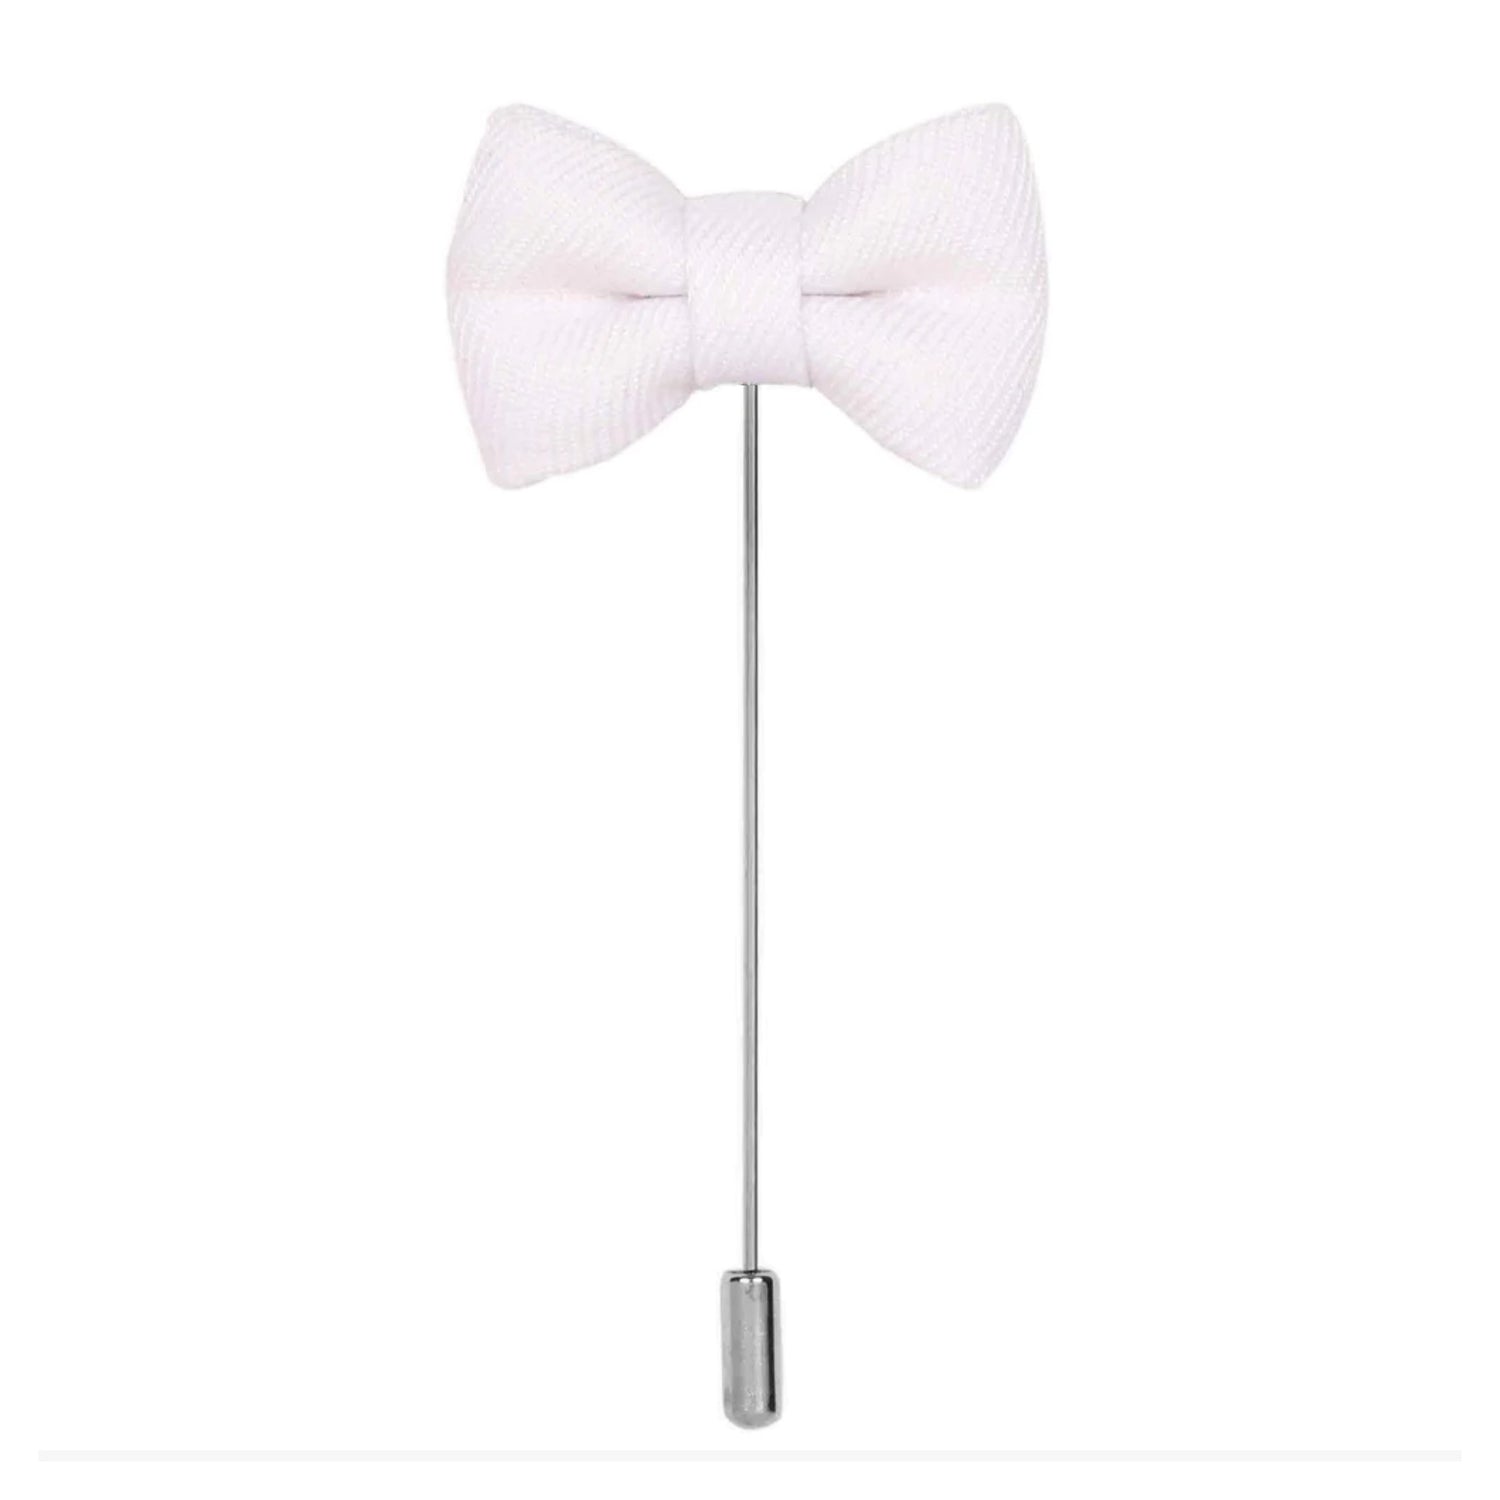 A White Colored Bow Tie Shaped Lapel Pin||White